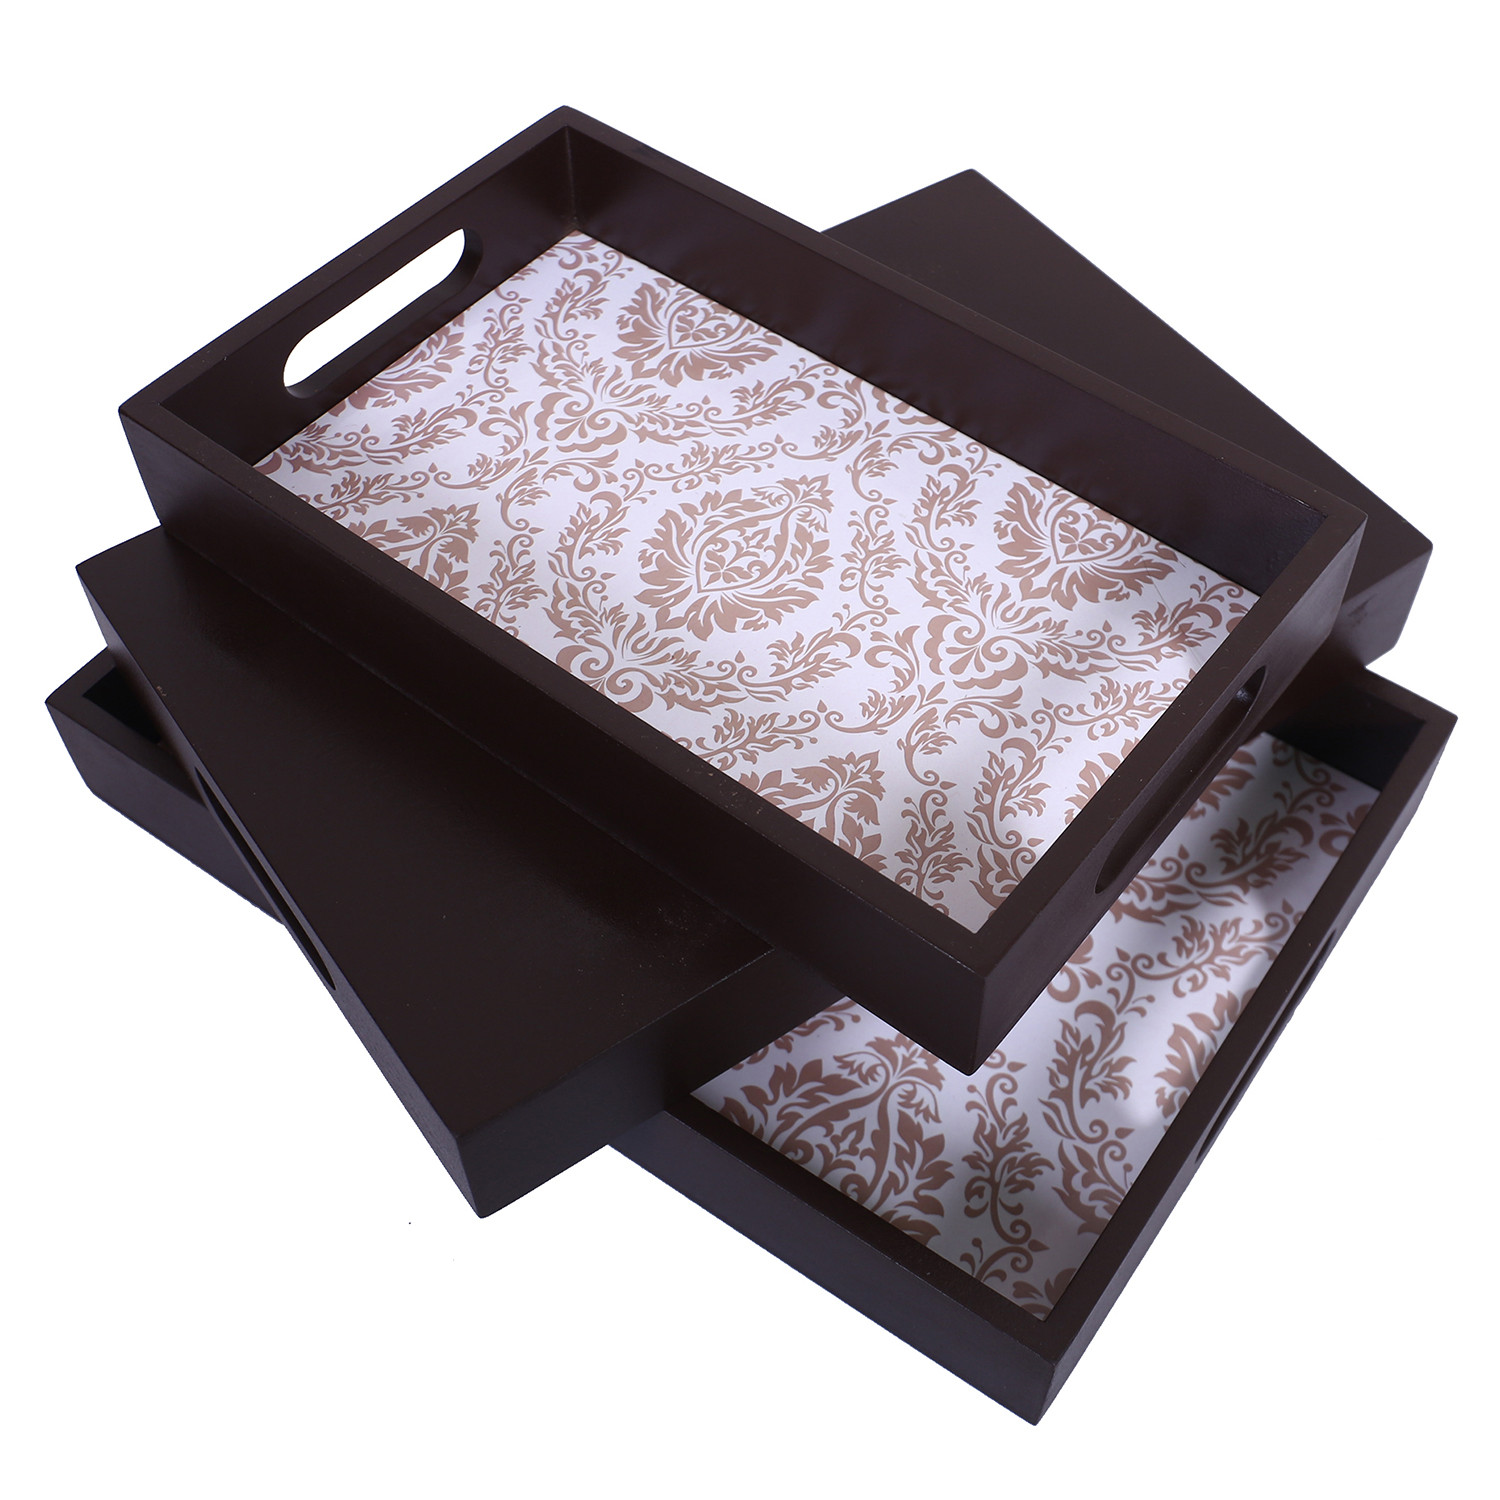 Kuber Industries Nested Serving Trays|Wooden Damask Gold Design Farmhouse Platter|Rectangular Shape Coffee Table Trays with Handle for Kitchen,Dining Area,Set of 3 (Brown)